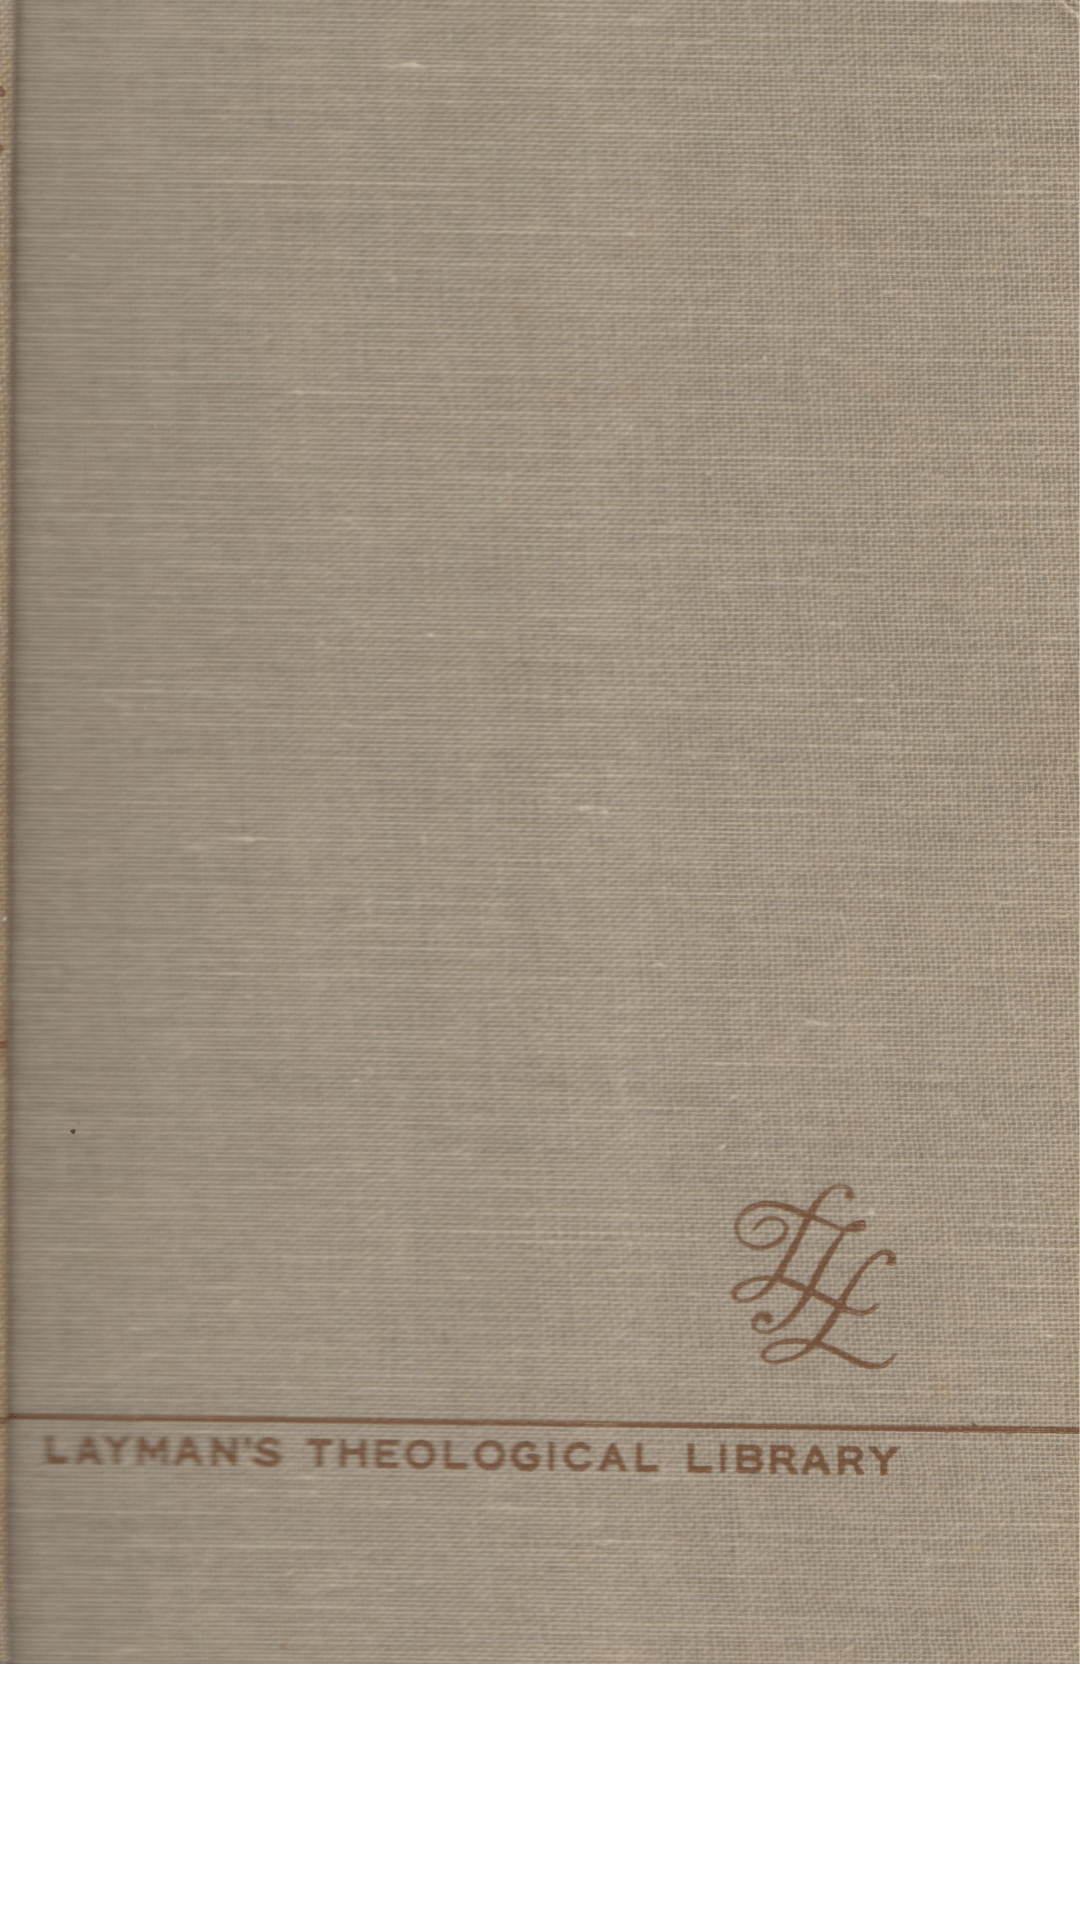 Modern Rivals to Christian Faith: Laymans Theological Library